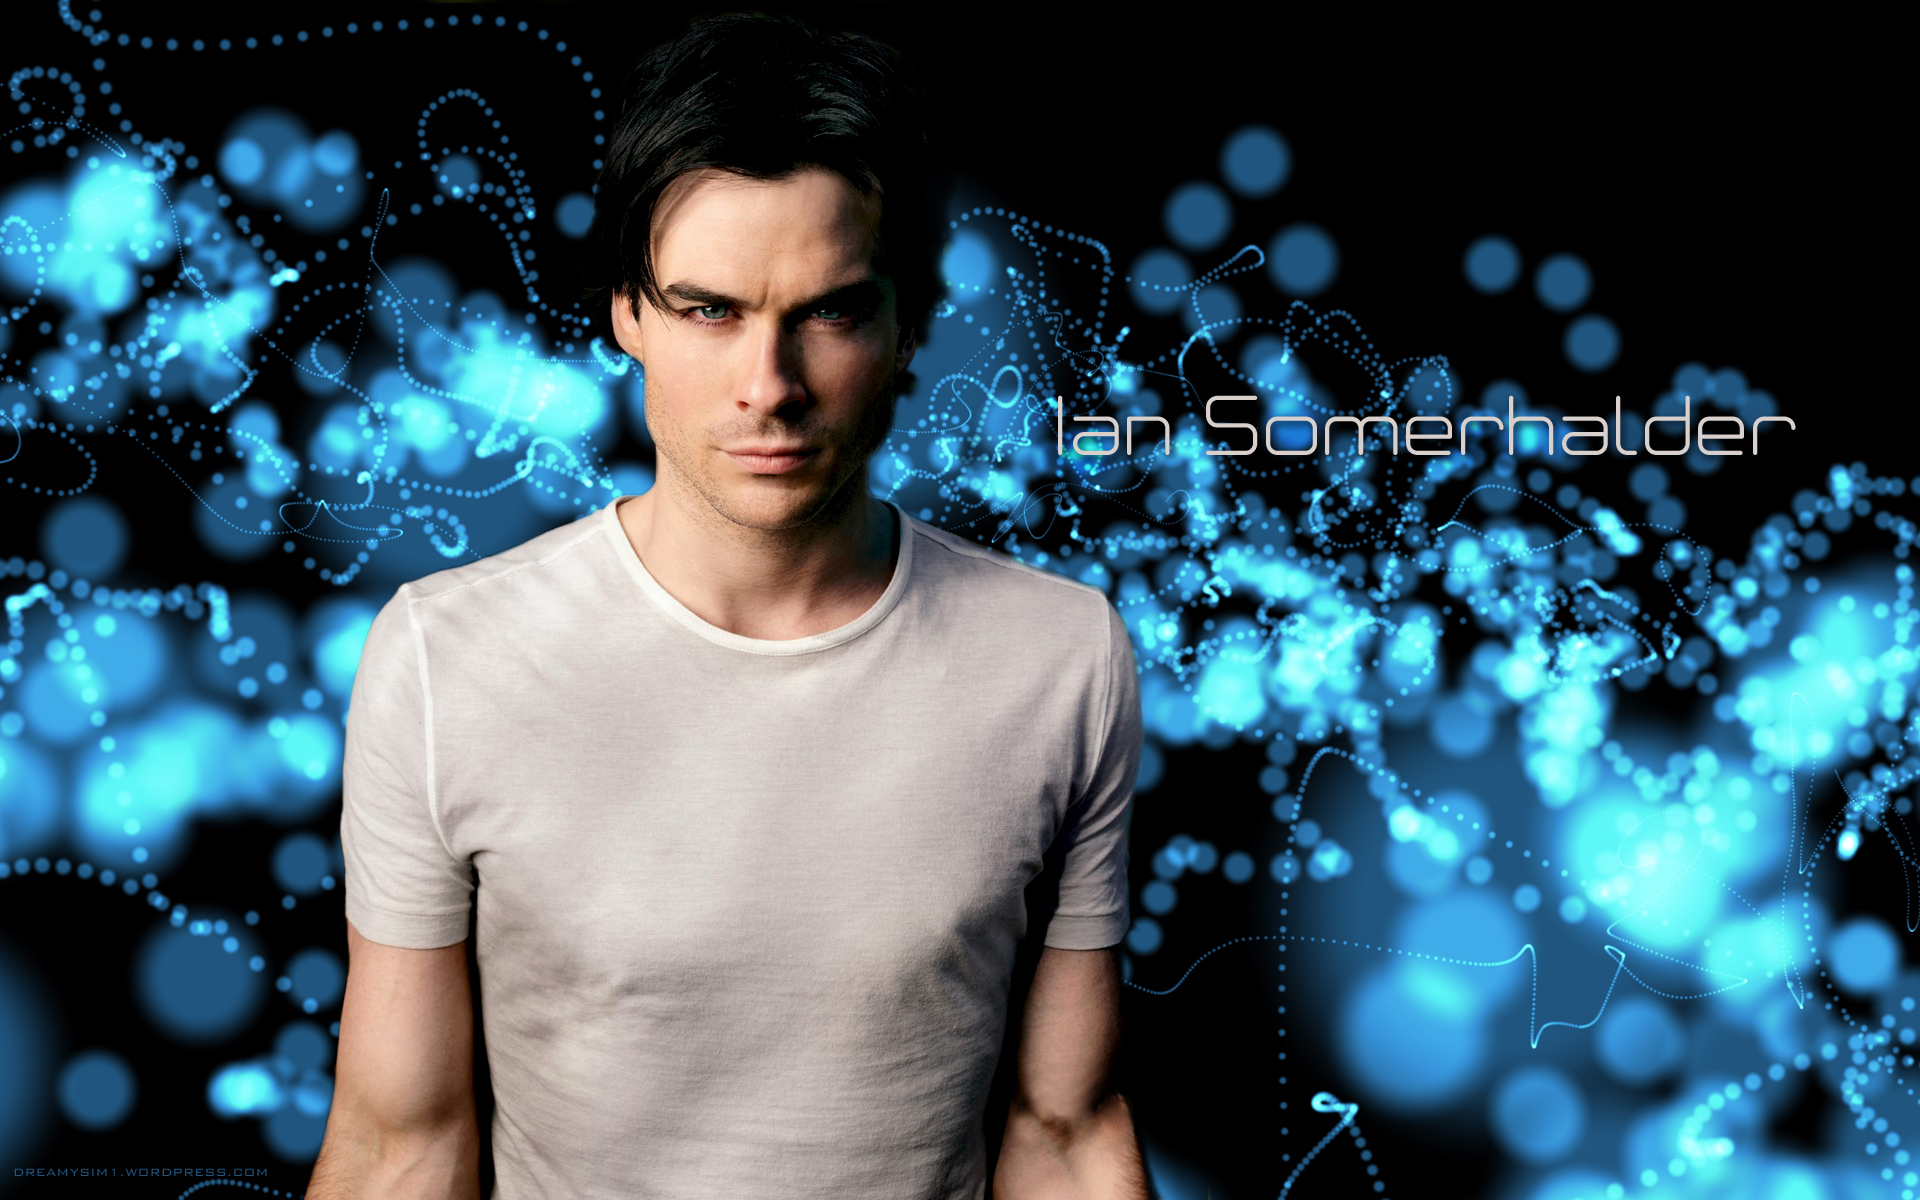 Famous Ian Somerhalder Wallpaper And Image Pictures